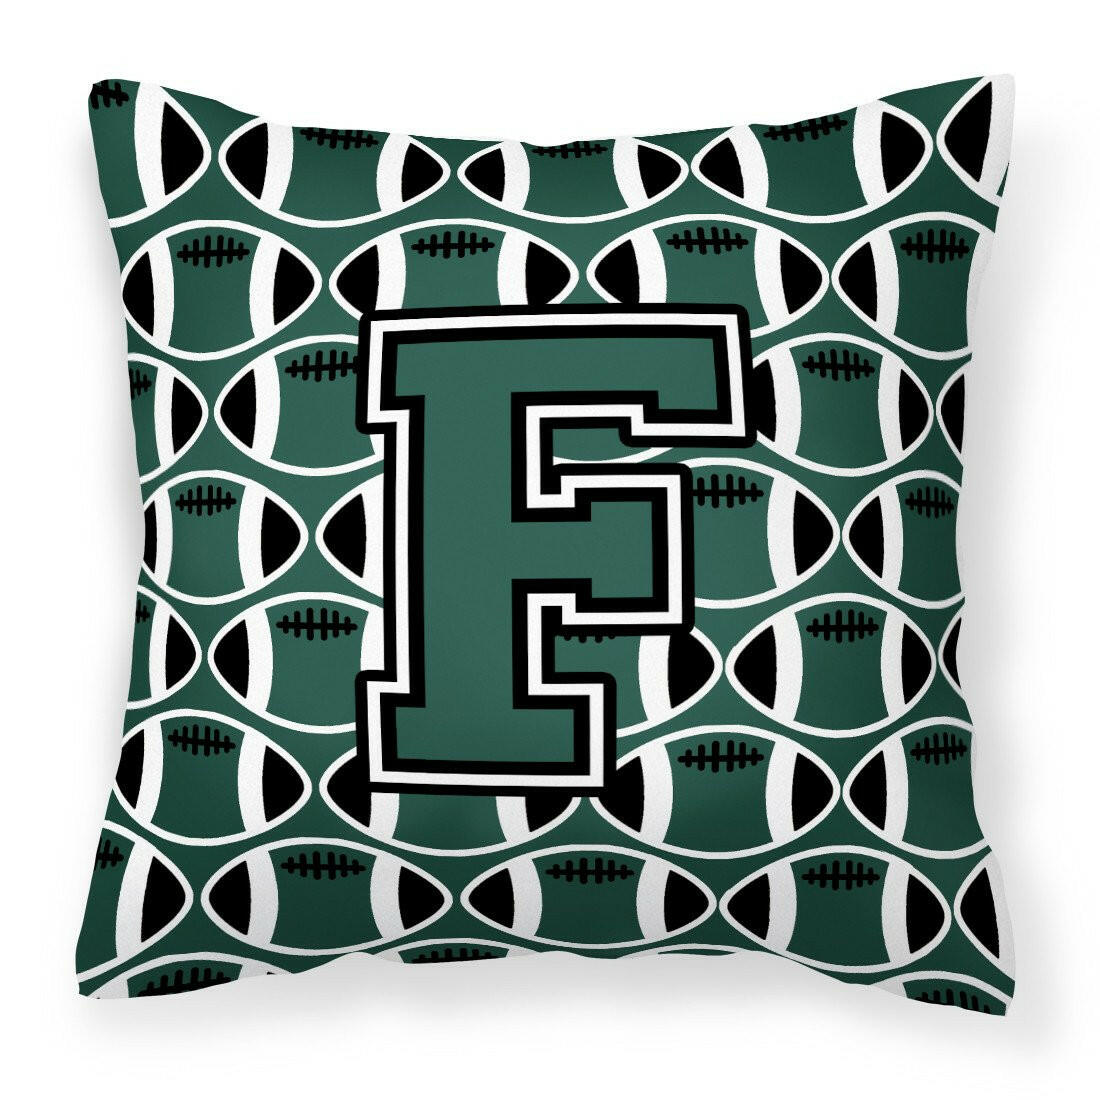 Letter F Football Green and White Fabric Decorative Pillow CJ1071-FPW1414 by Caroline's Treasures